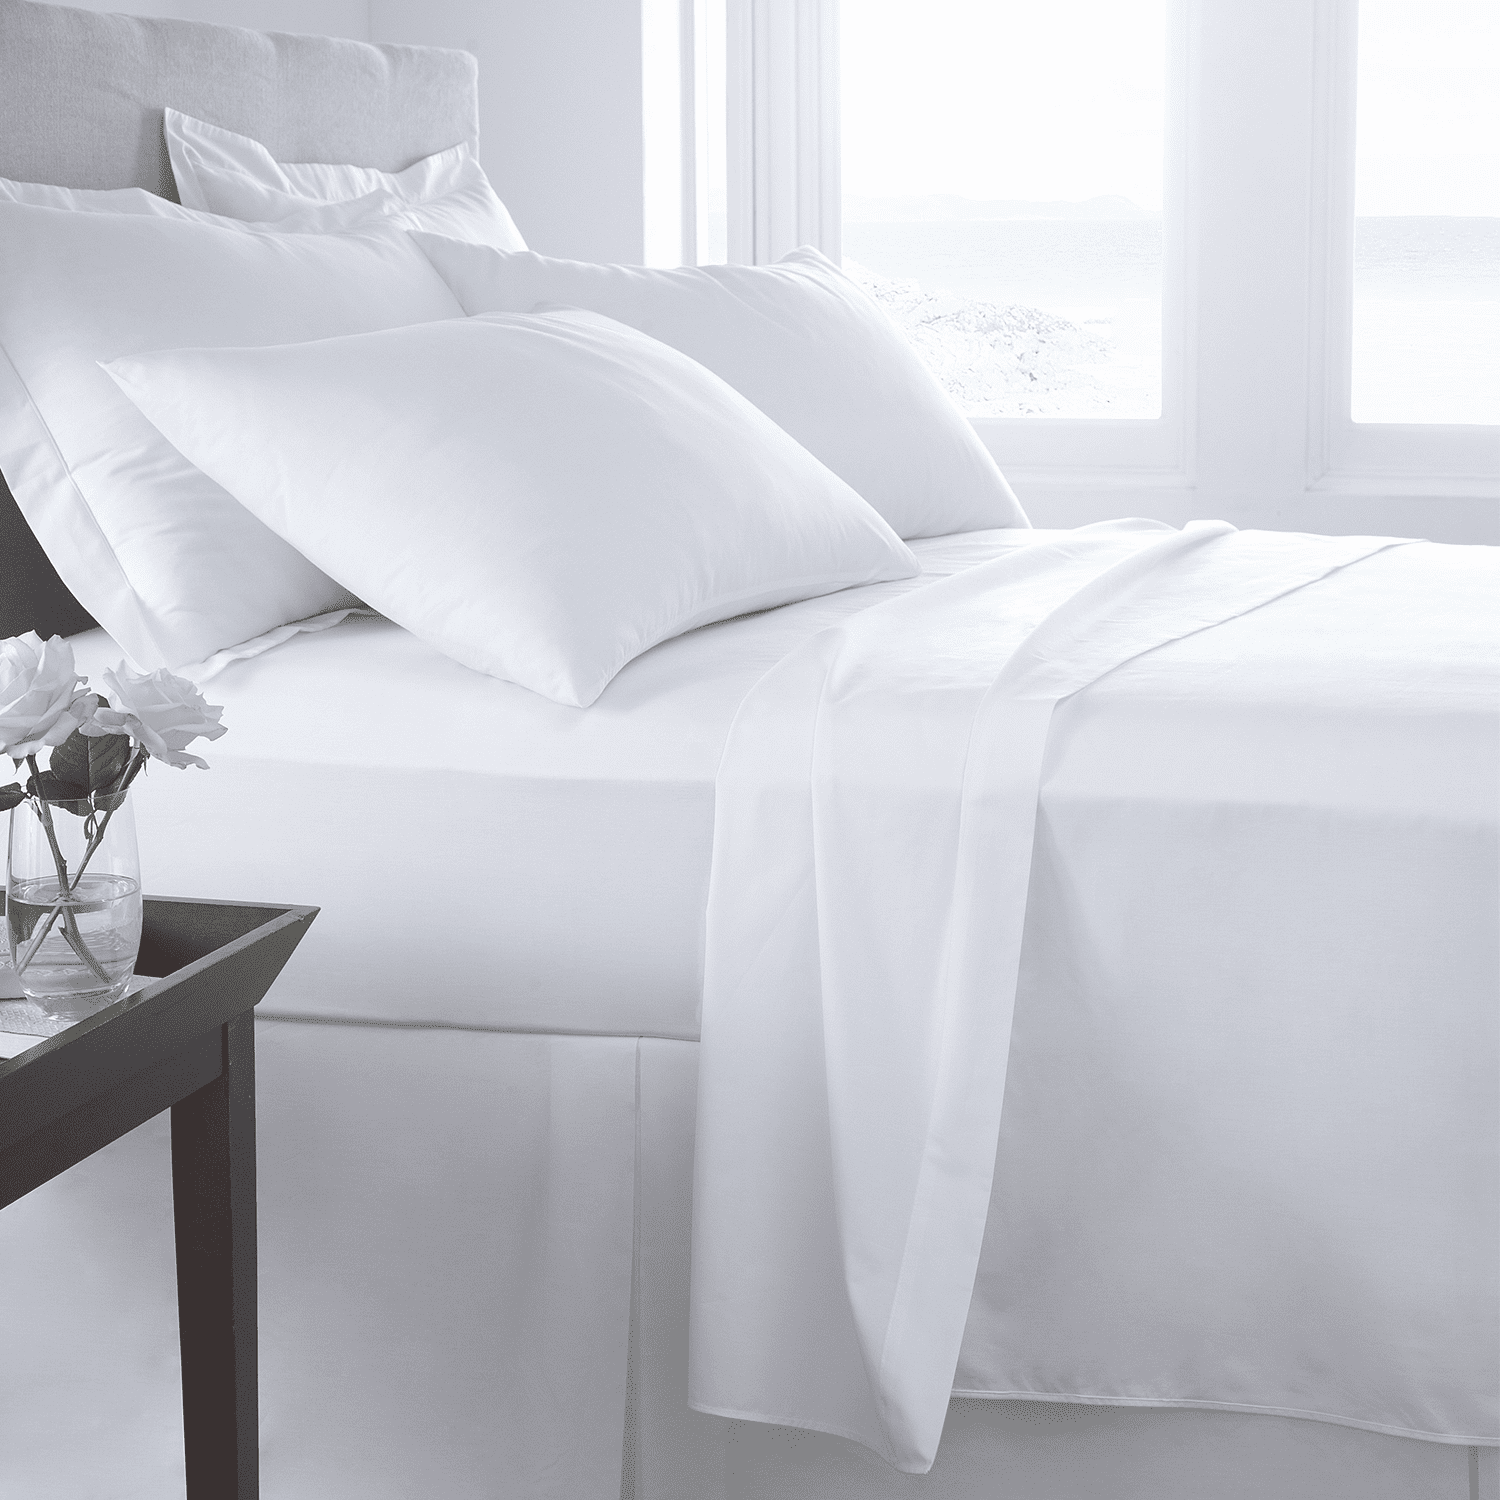 Cotton 200TC Ultimate Luxury Hotel Quality Percale Mattress Protector 